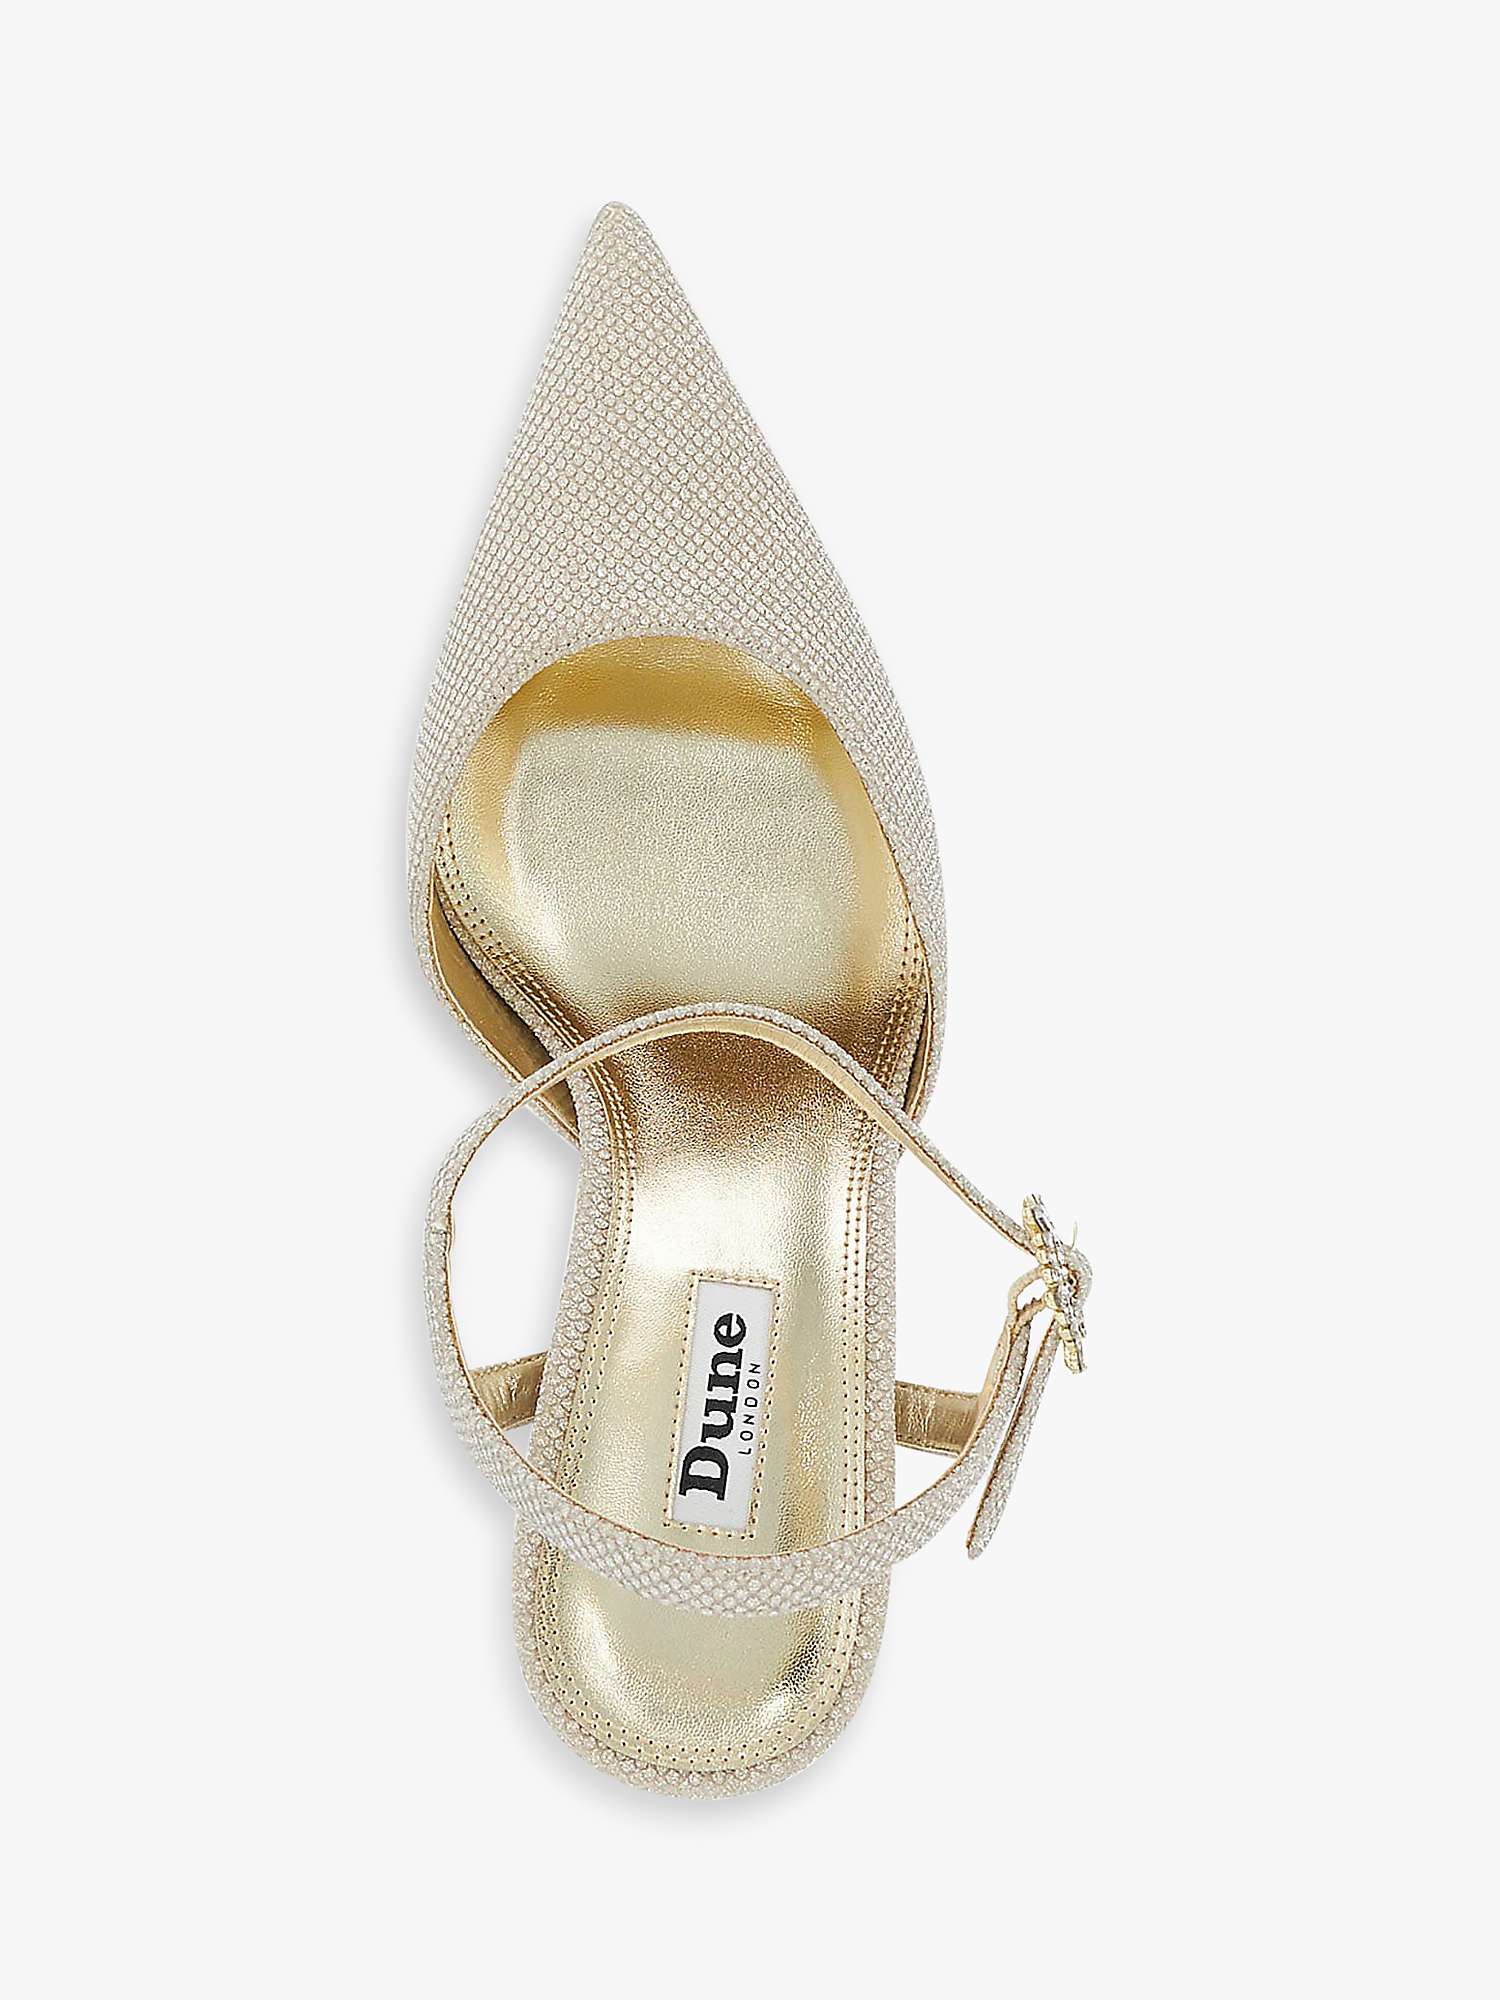 Dune Channel Slingback Court Shoes, Gold at John Lewis & Partners